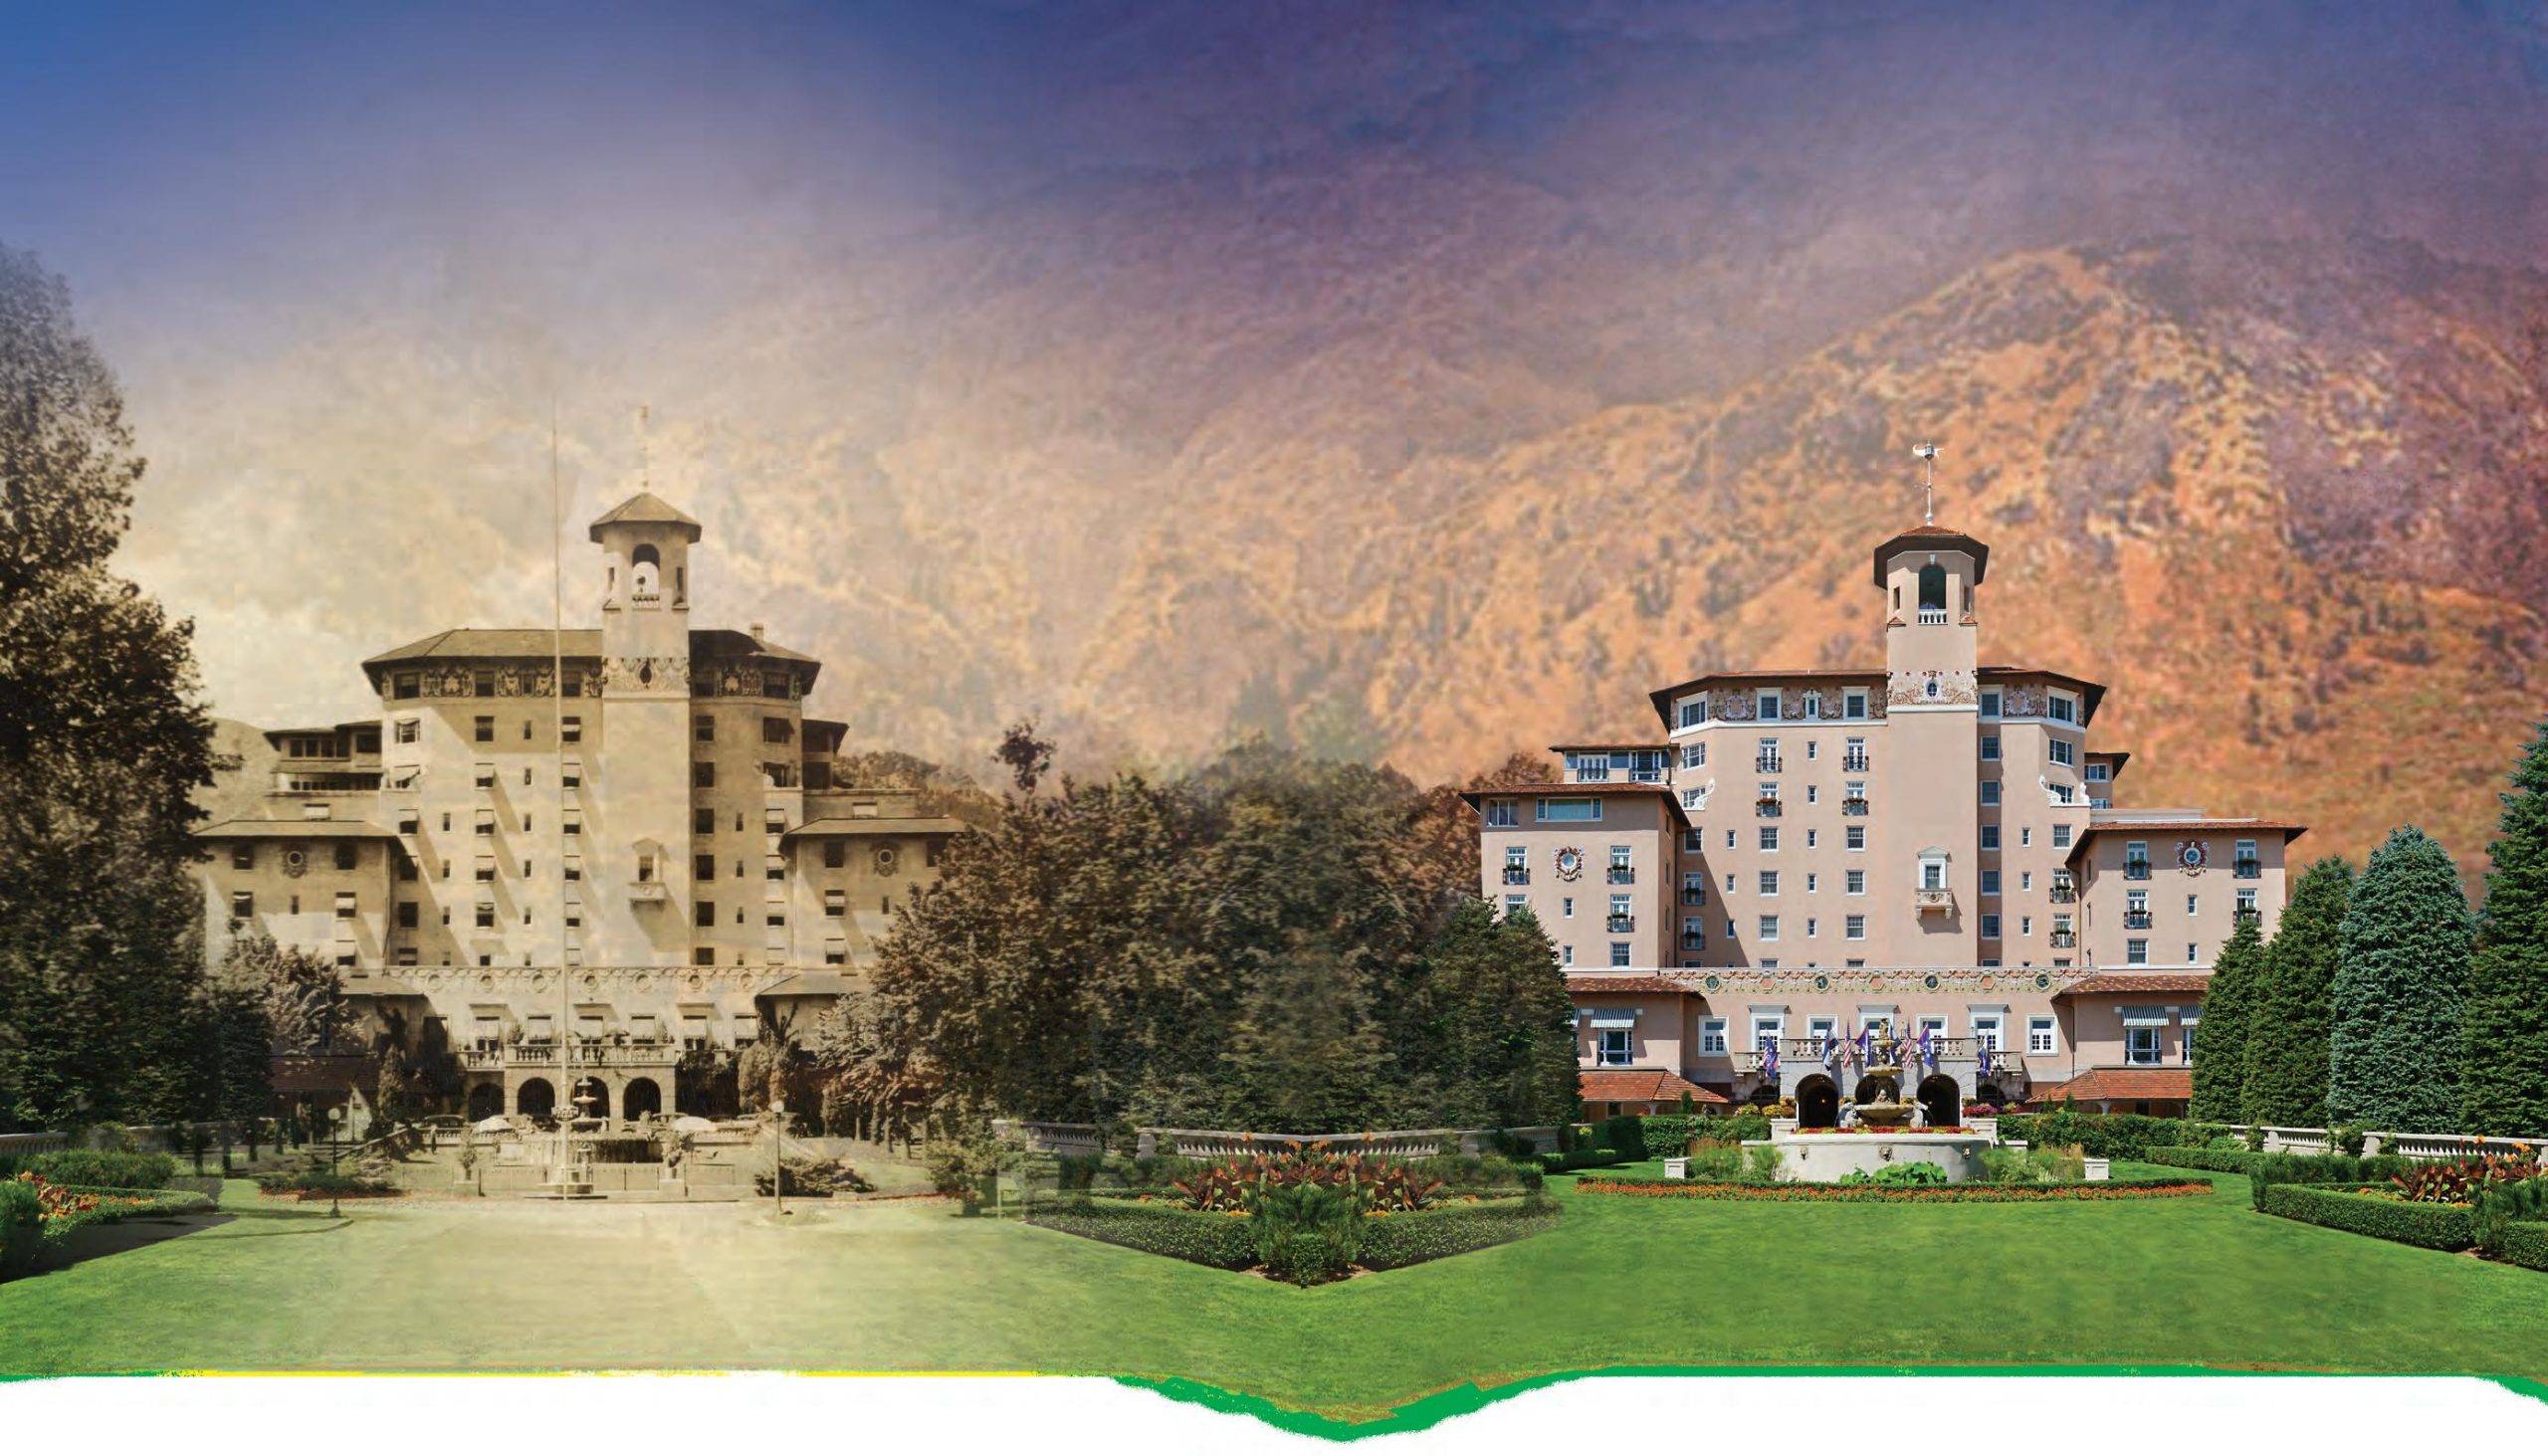 The Rise and Resilience of the Broadmoor: A Century of Elegance and Endurance in Colorado Springs